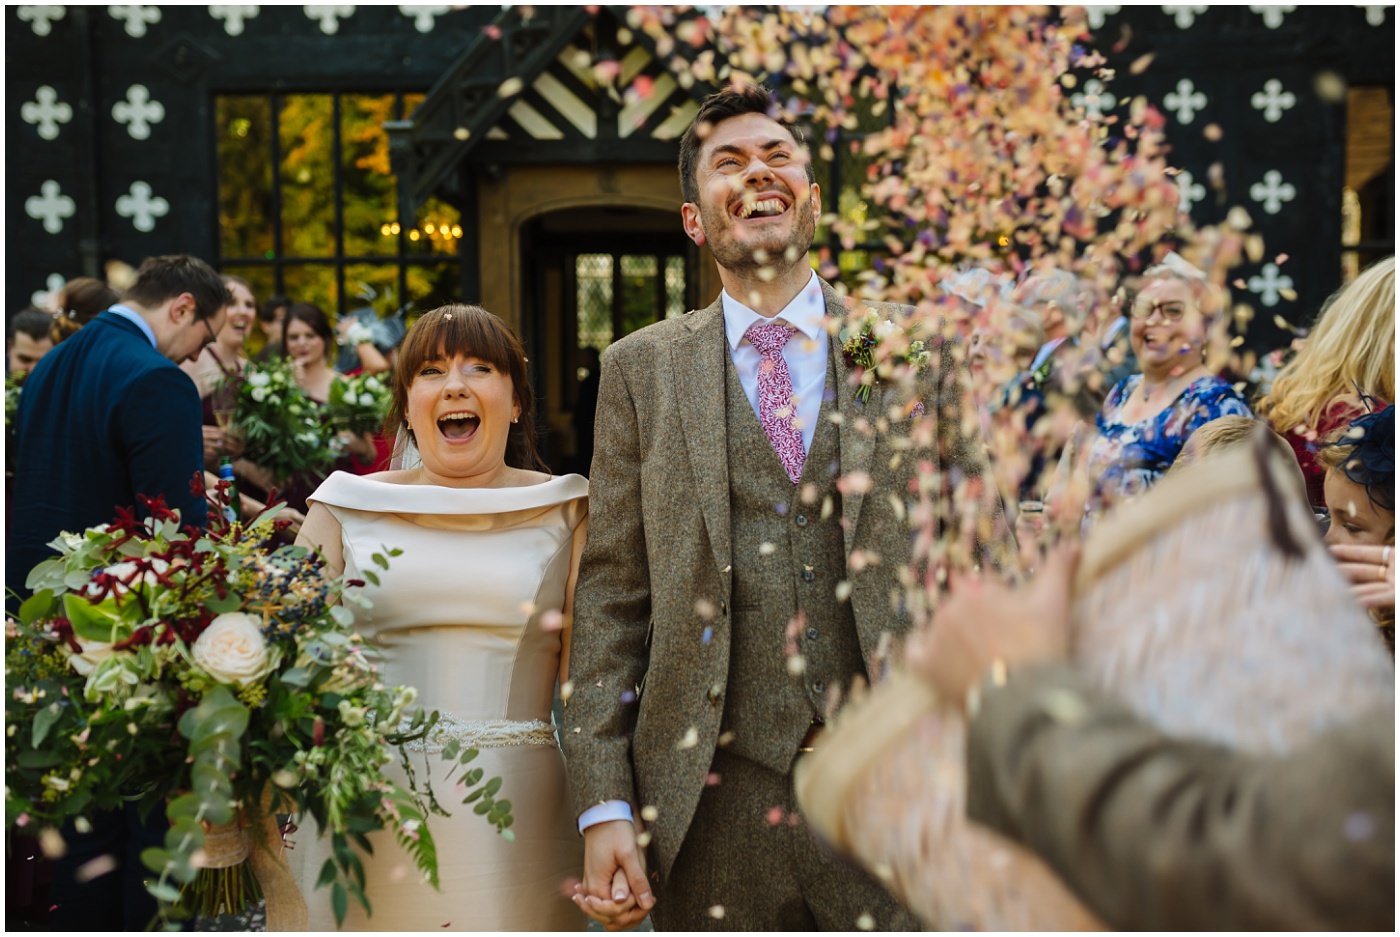 buckets of confetti thrown over bride and groom leaving samlesbury hall